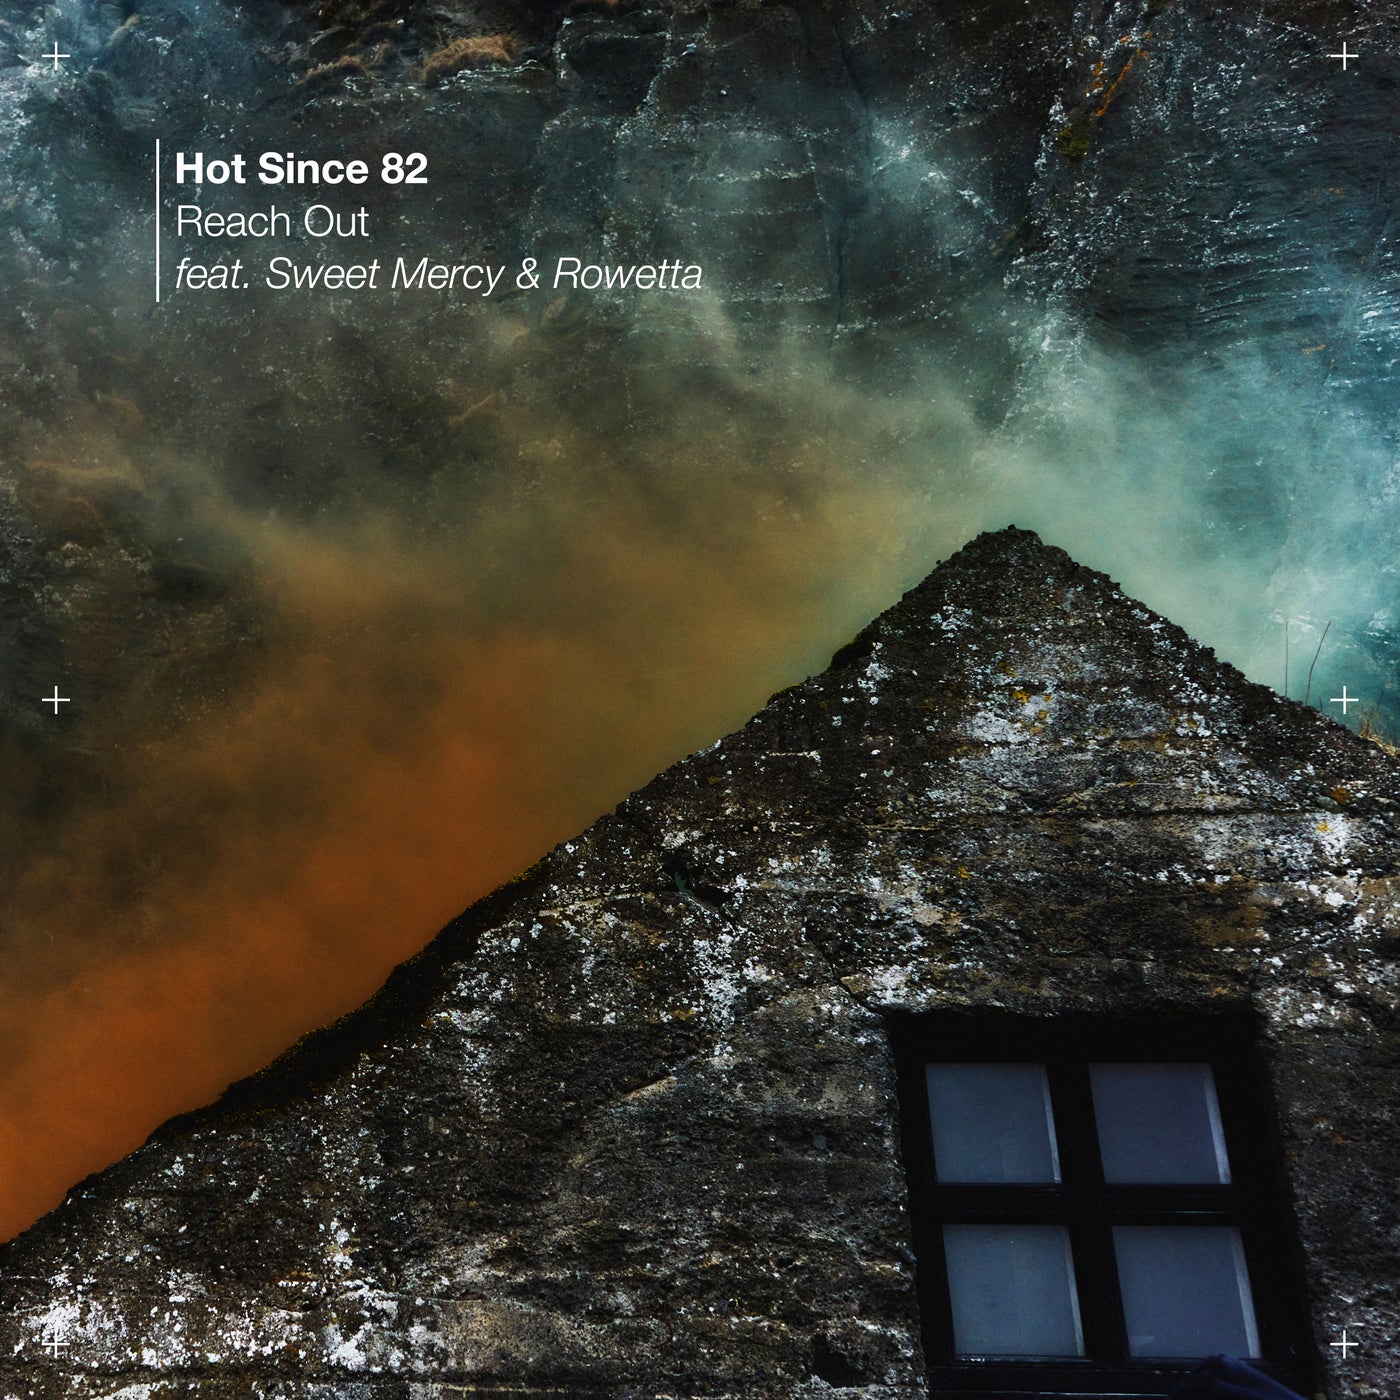 image cover: Rowetta, Sweet Mercy, Hot Since 82 - Reach Out on Knee Deep In Sound